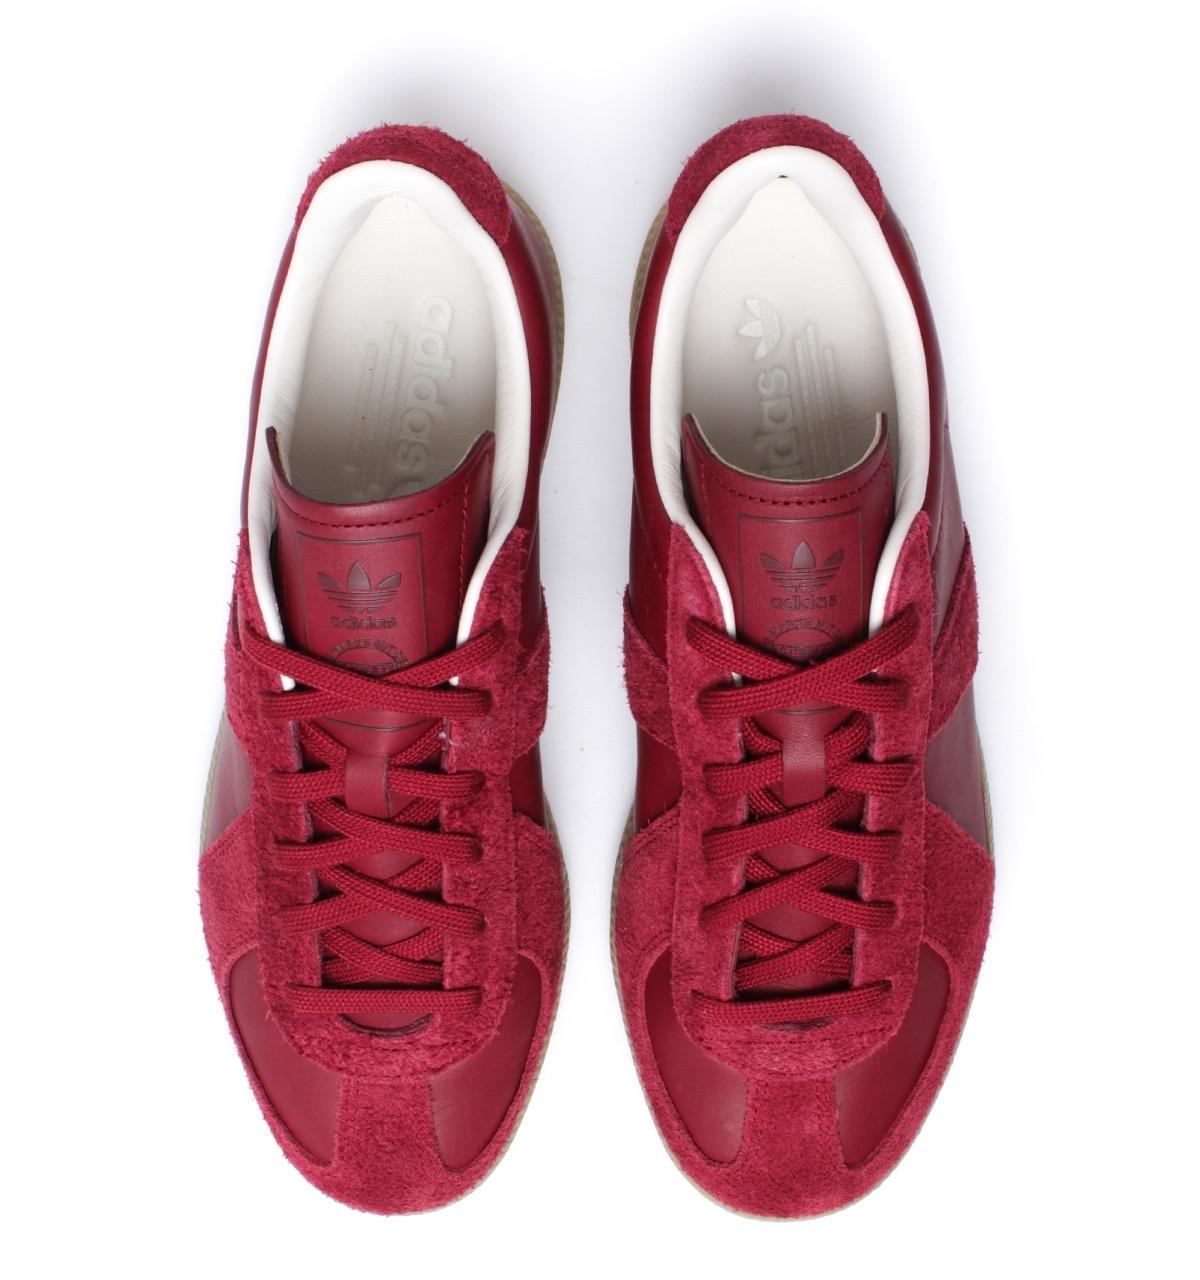 adidas Originals Leather Bw Army Burgundy Trainers in Red for Men - Lyst